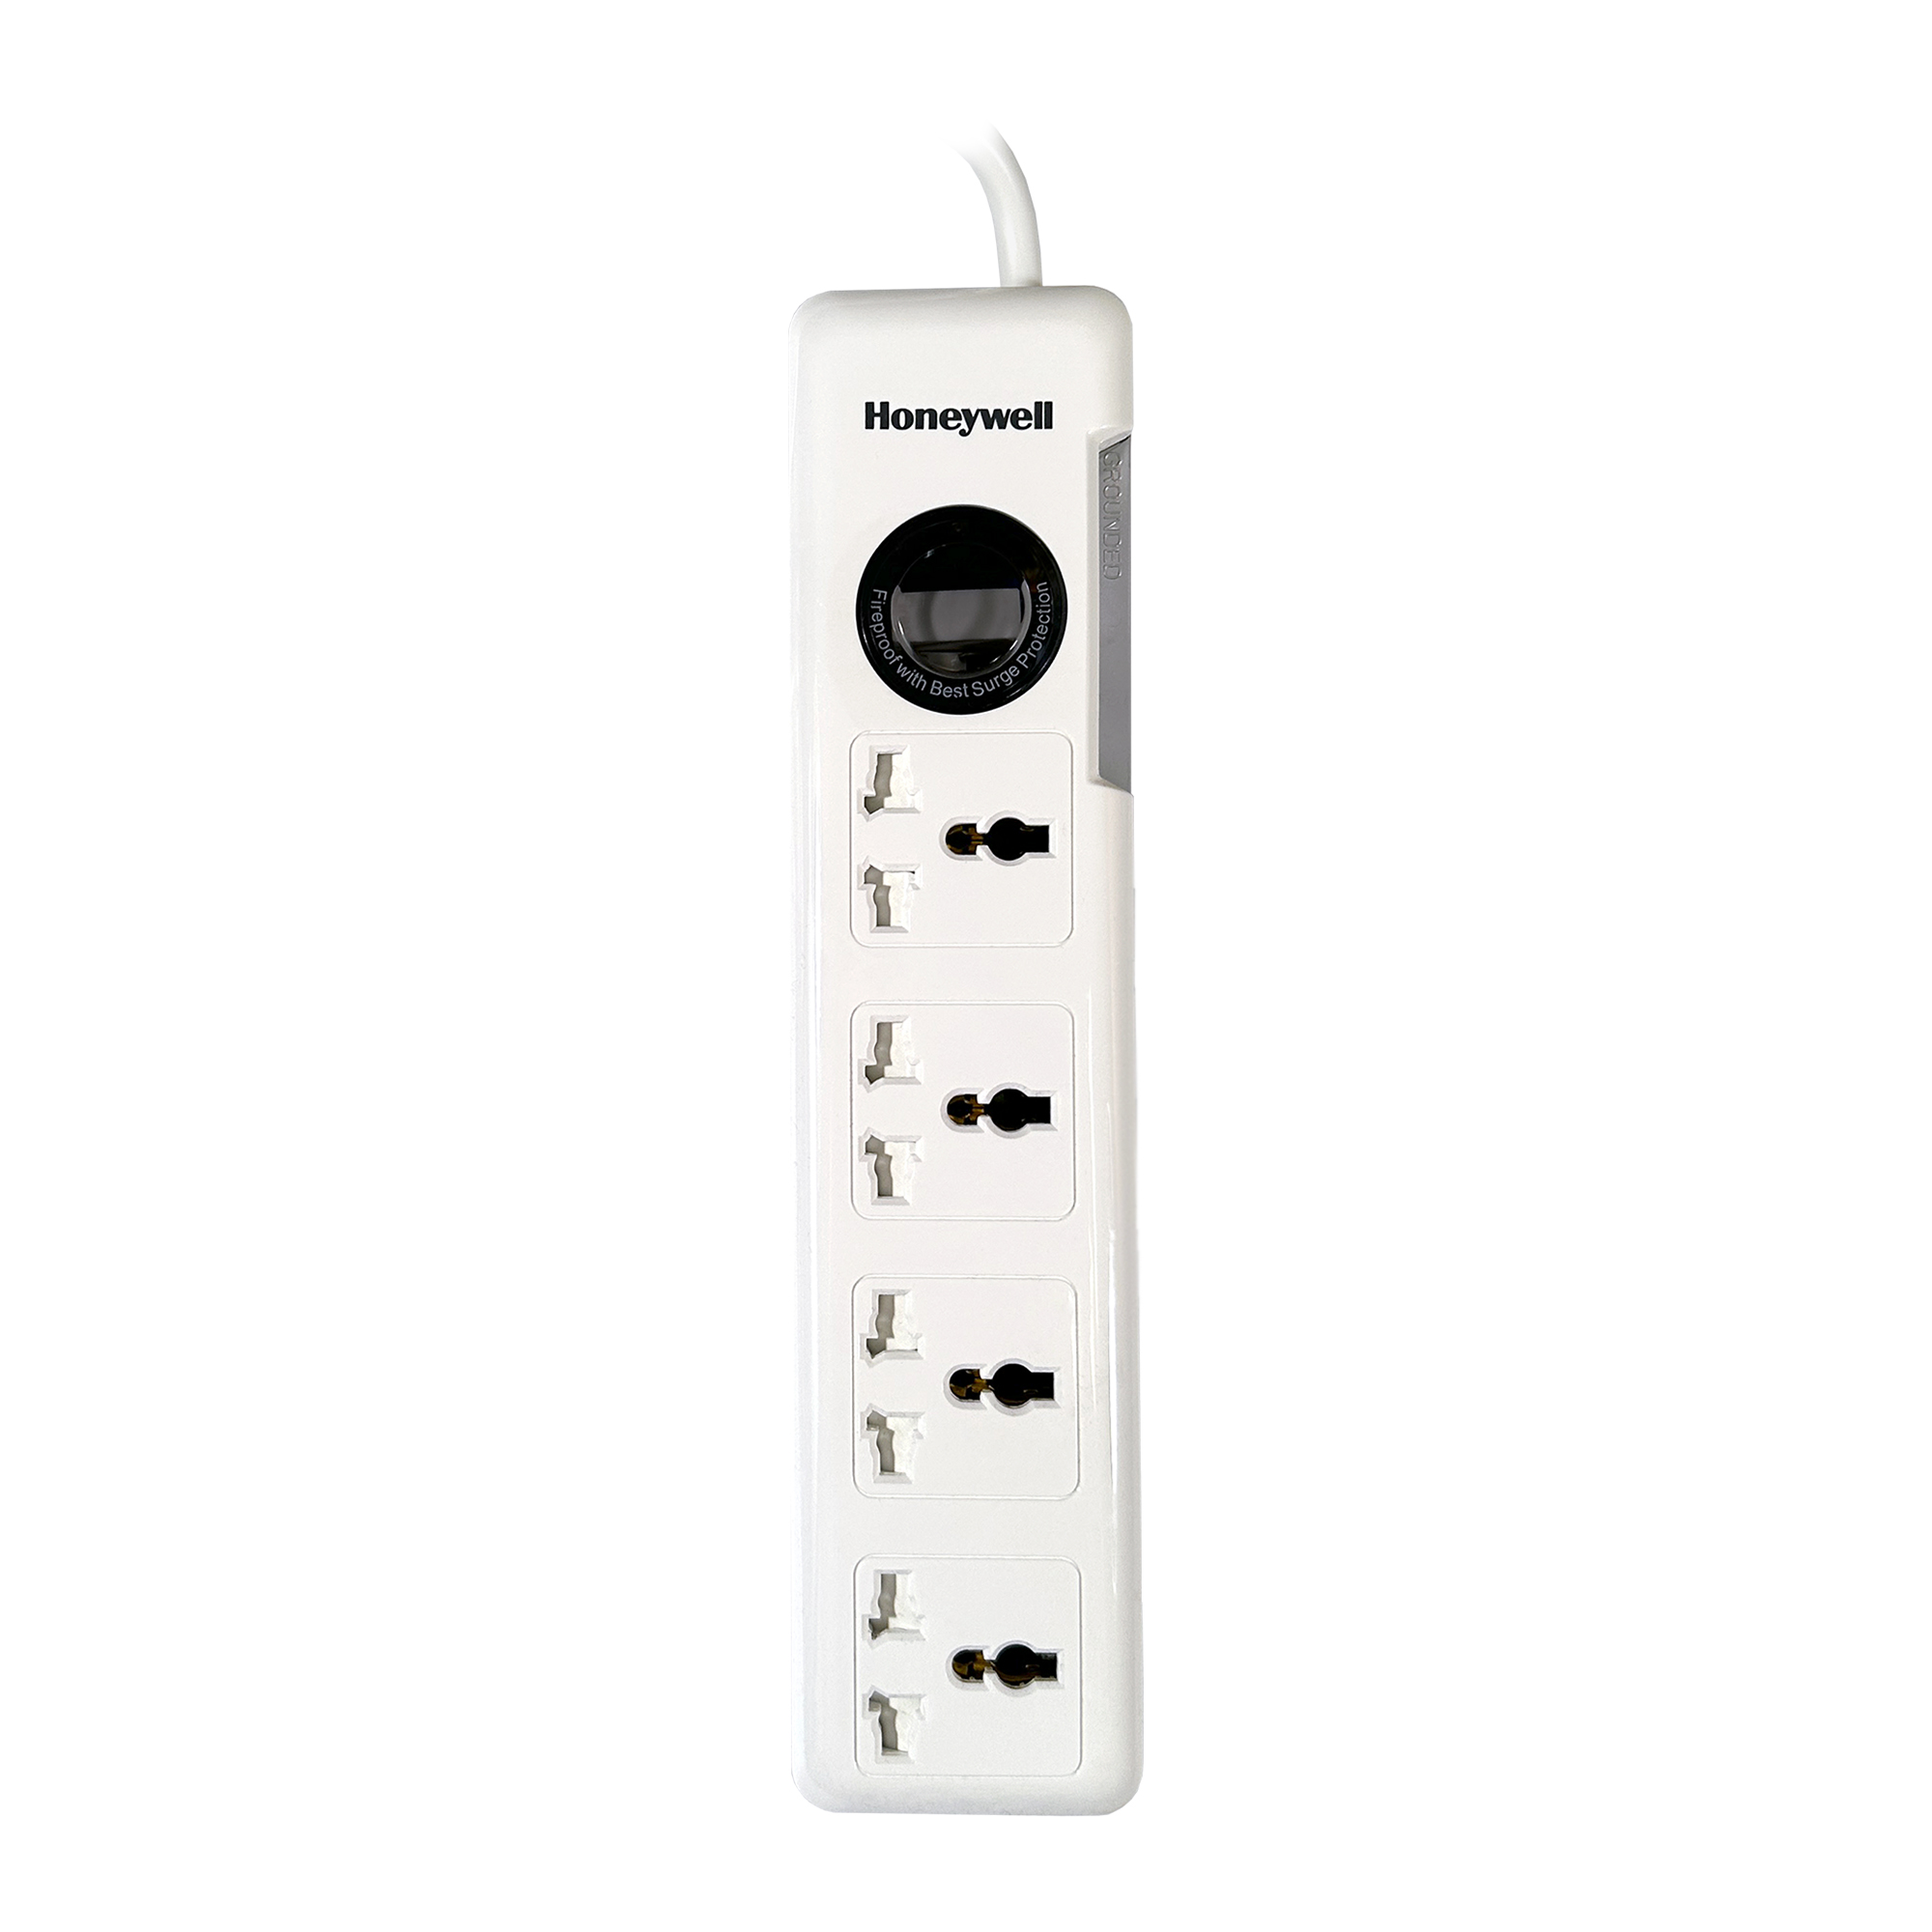 Honeywell Surge Protector with 4 Universal Sockets and 1.5 Meter Cord - White